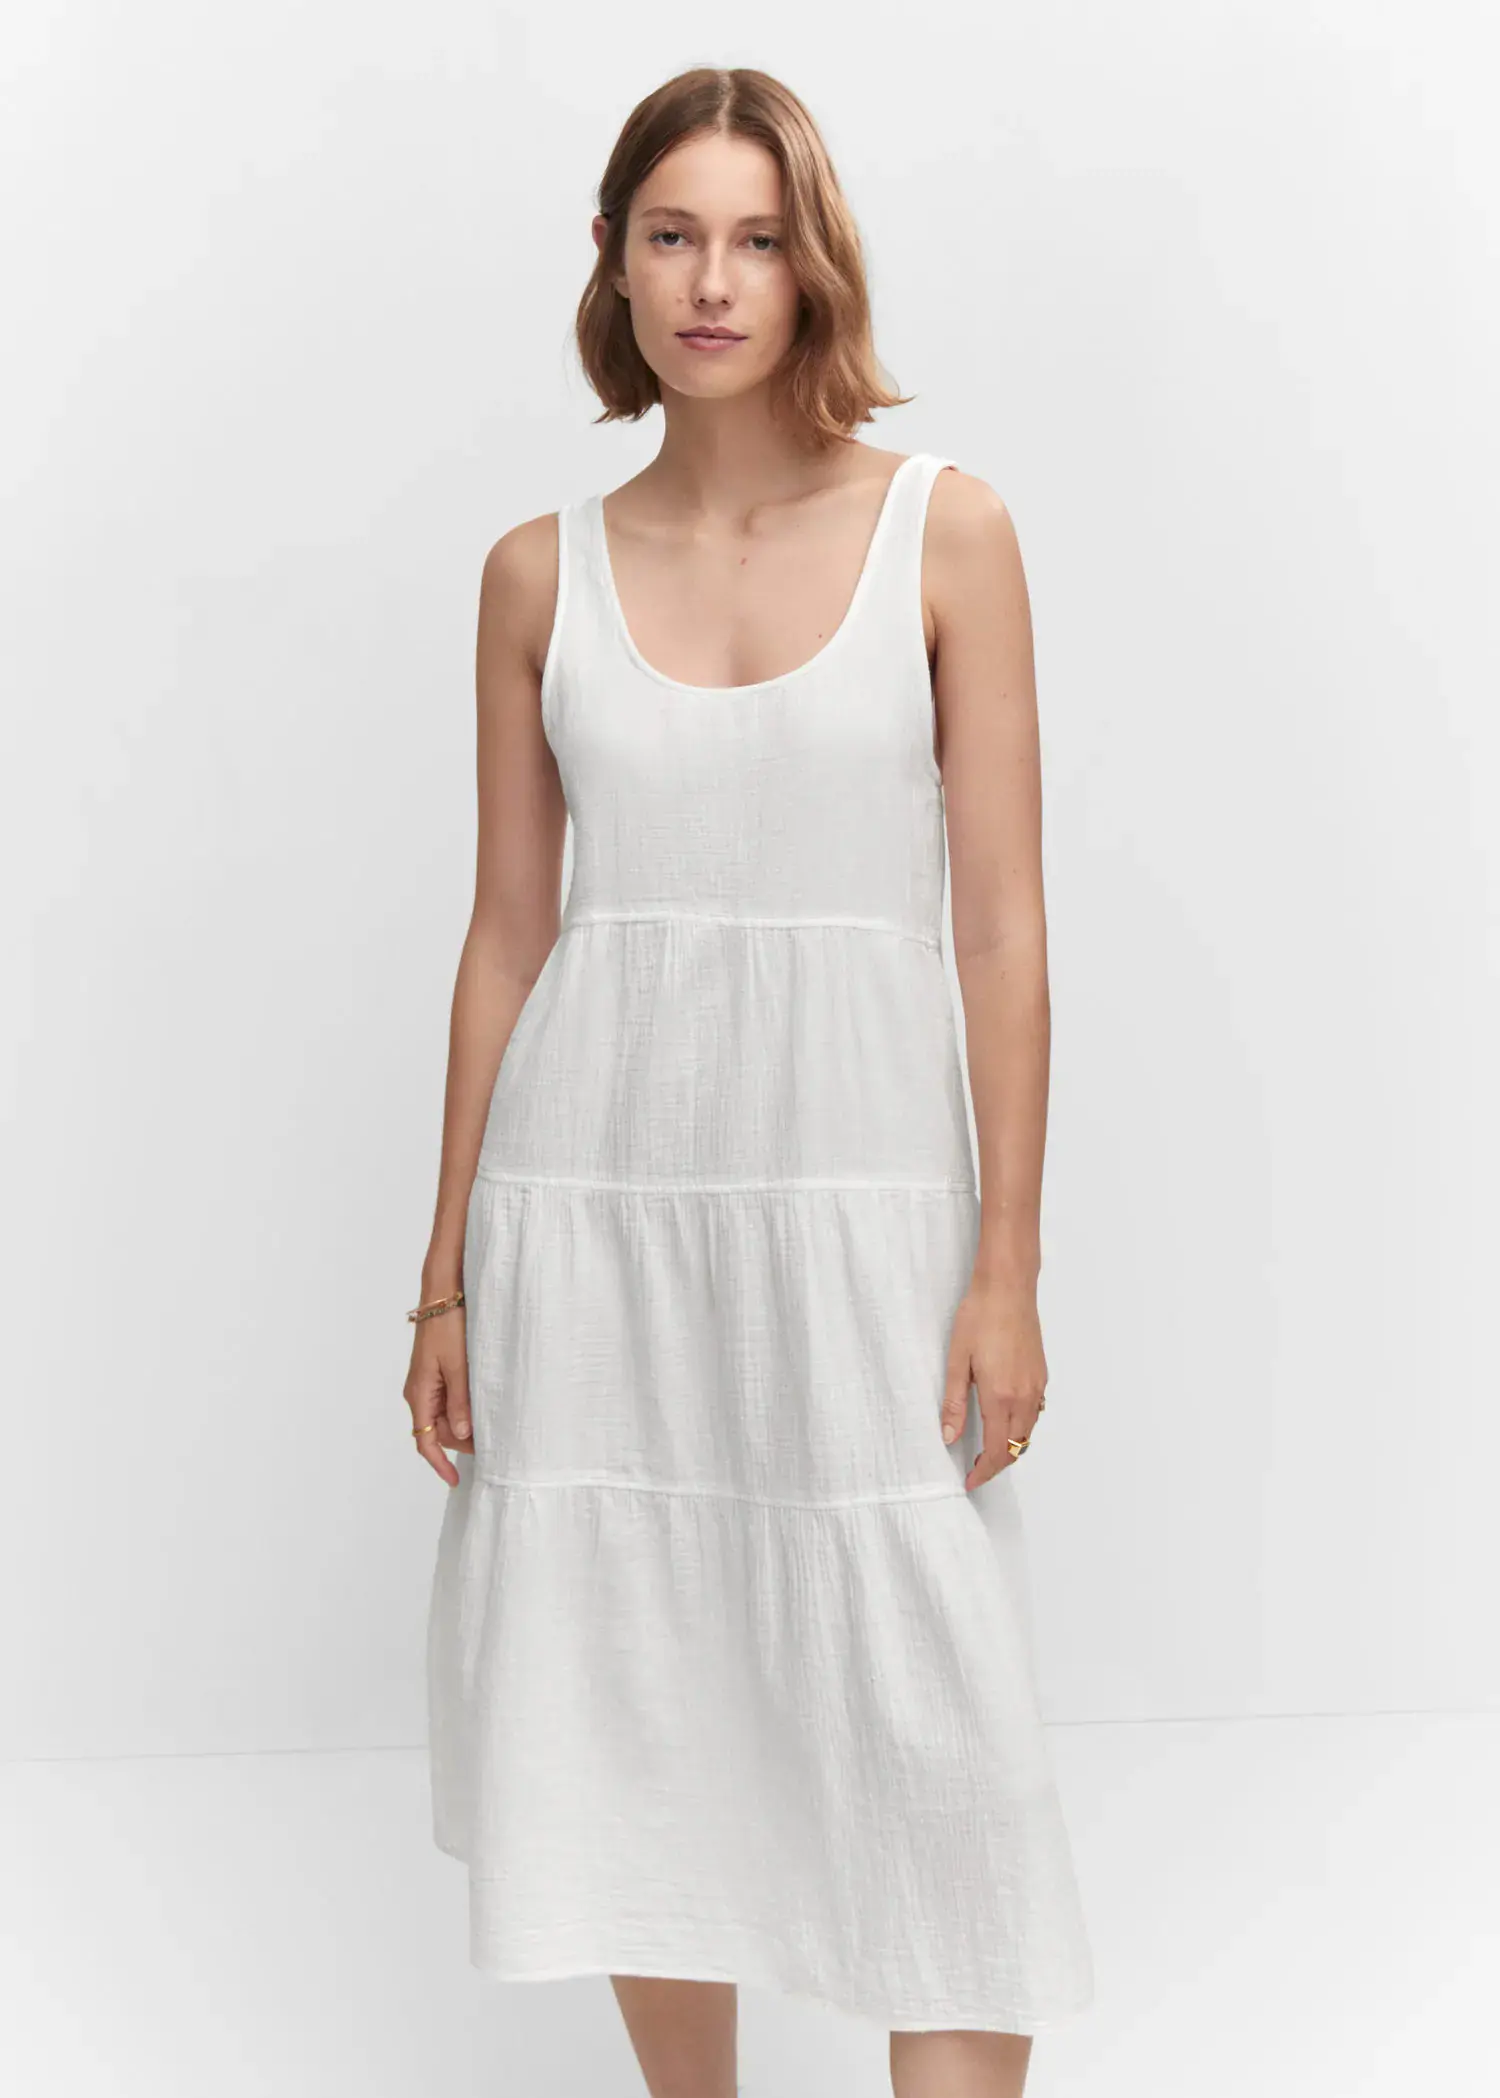 Mango Flared cotton dress. a woman wearing a white dress standing in front of a white wall. 